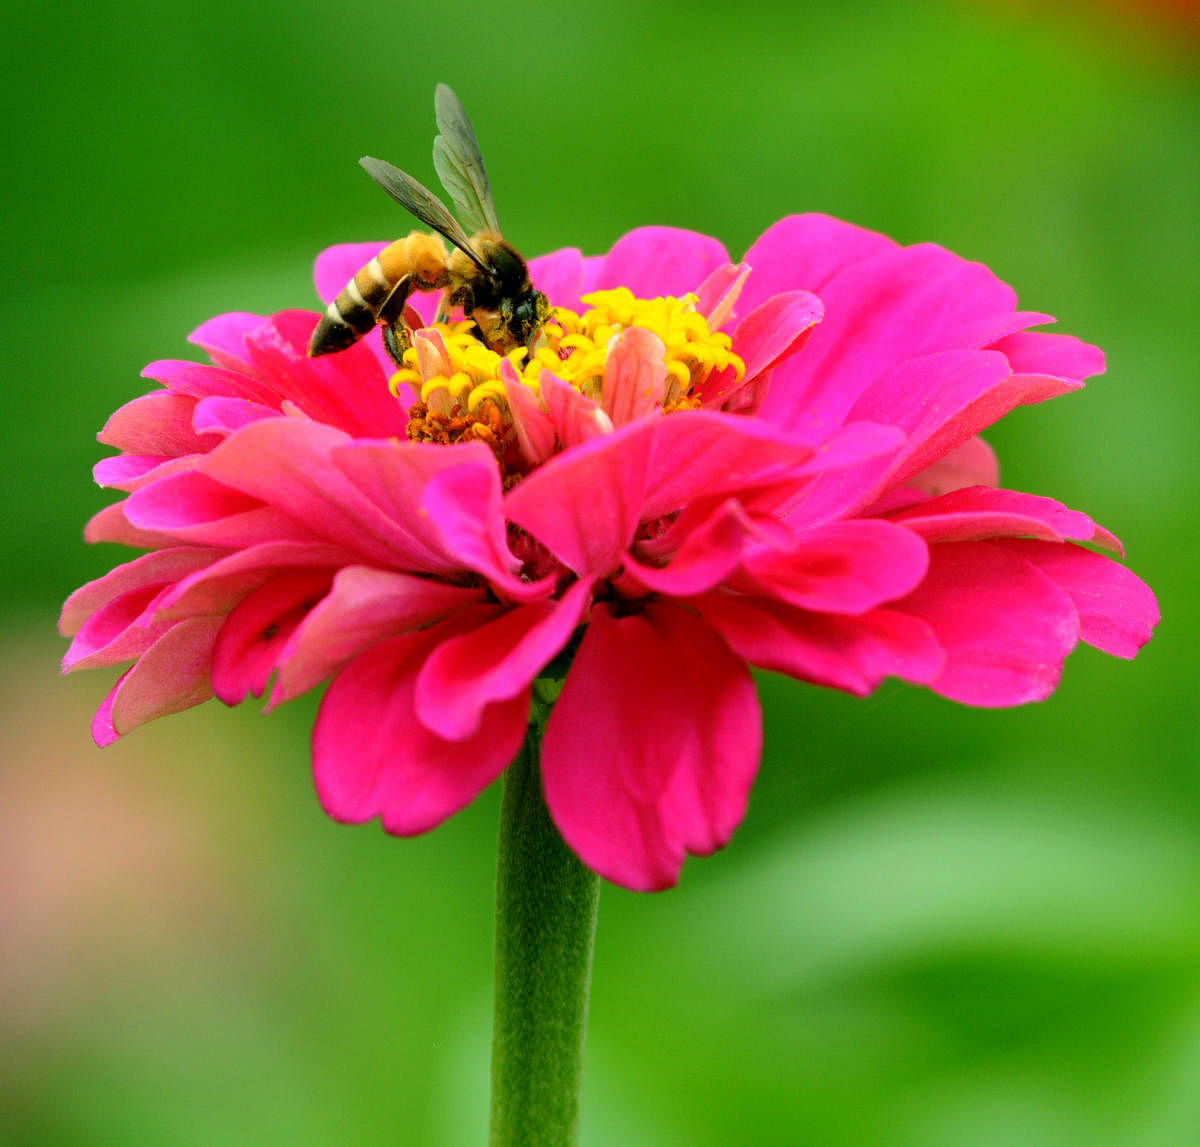 Flowers alter their features to attract pollinators